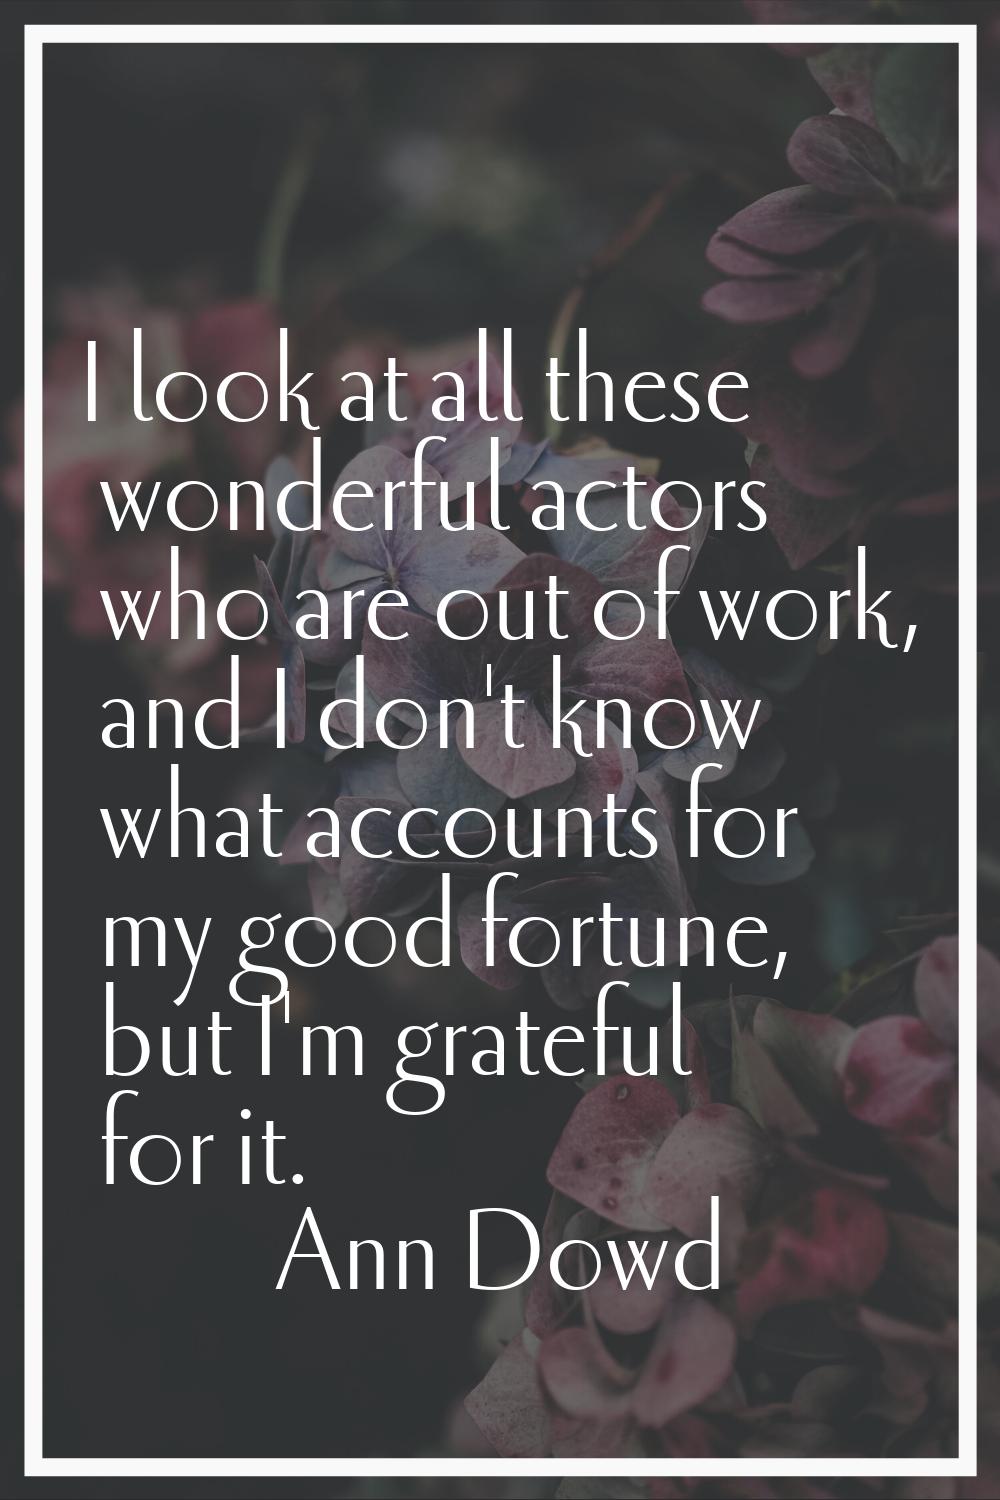 I look at all these wonderful actors who are out of work, and I don't know what accounts for my goo